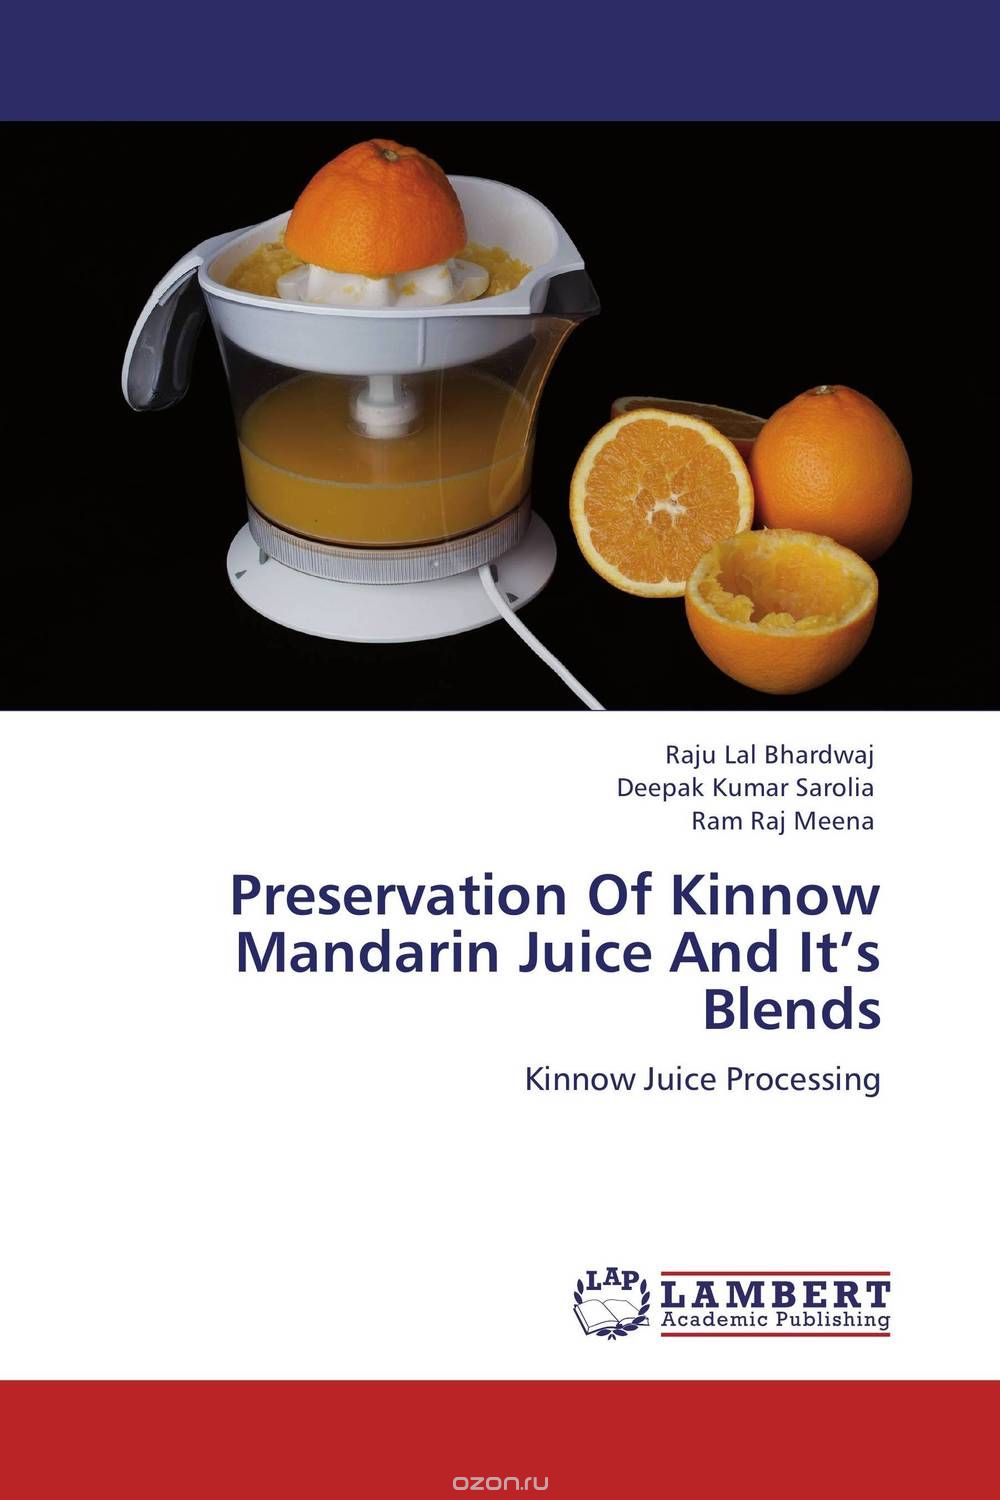 Preservation Of Kinnow Mandarin Juice And It’s Blends